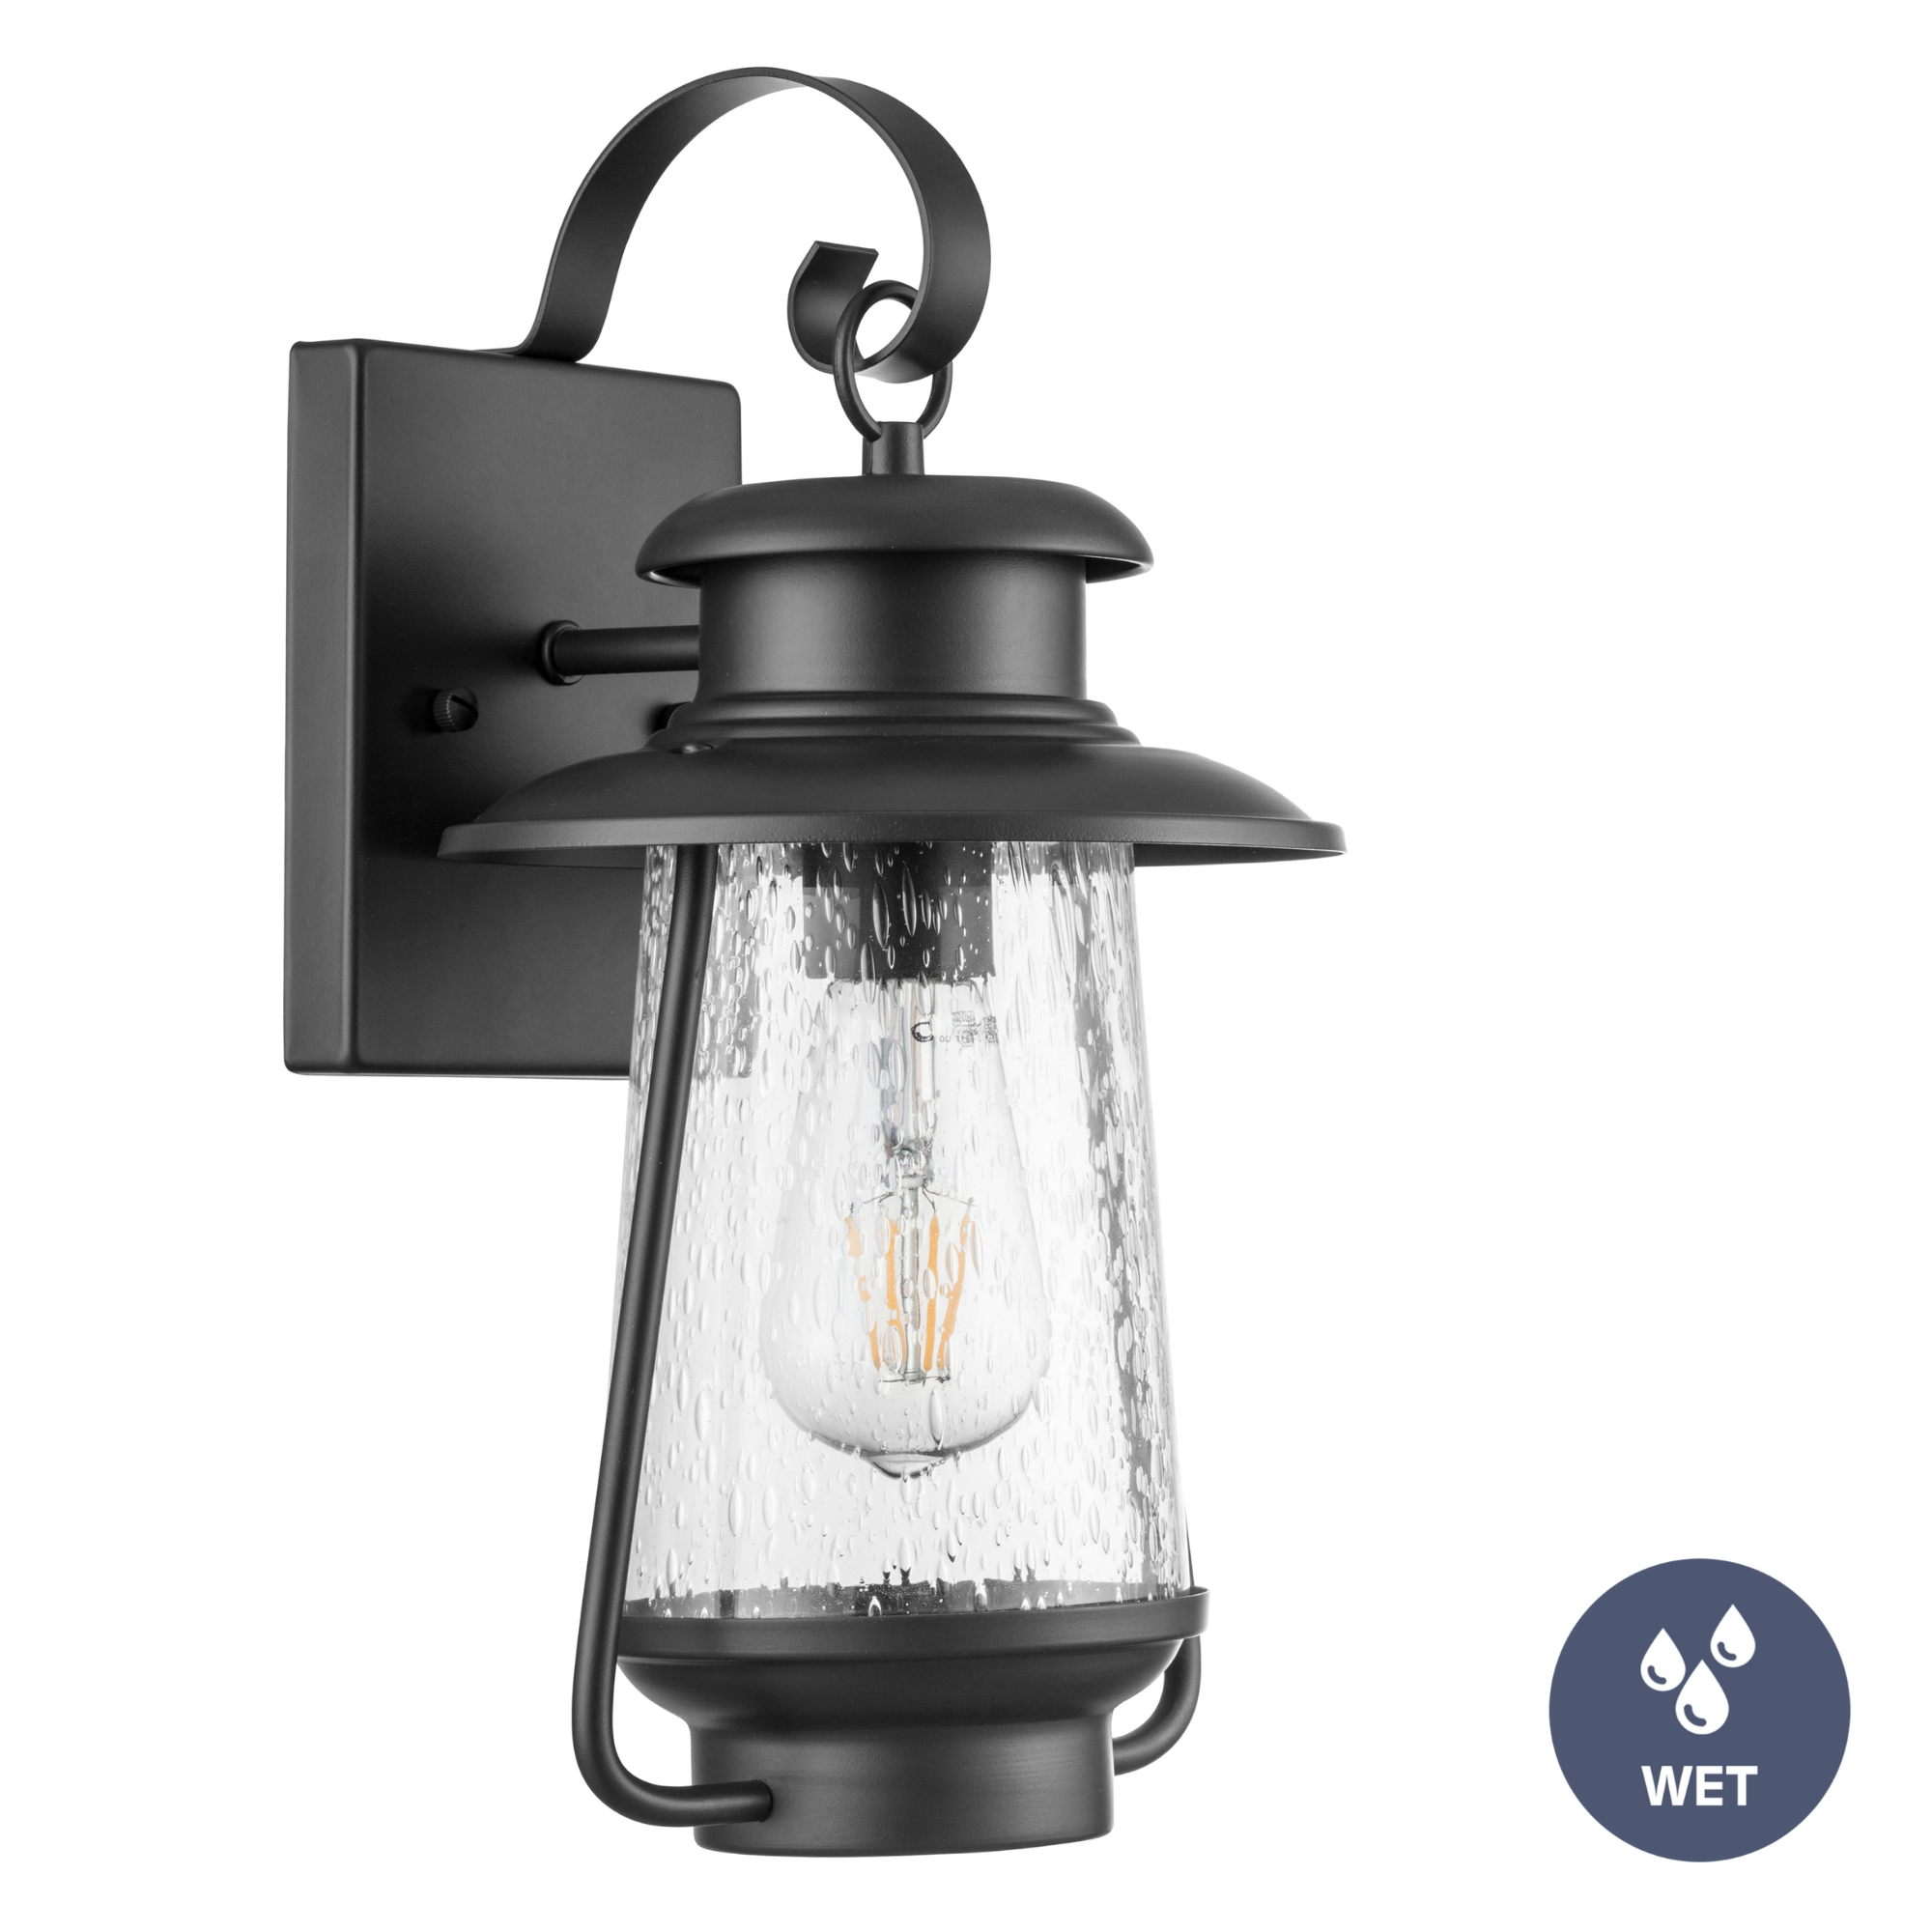 Sommerset, Wet-Rated Coach Light, Matte Black – Prominence Home